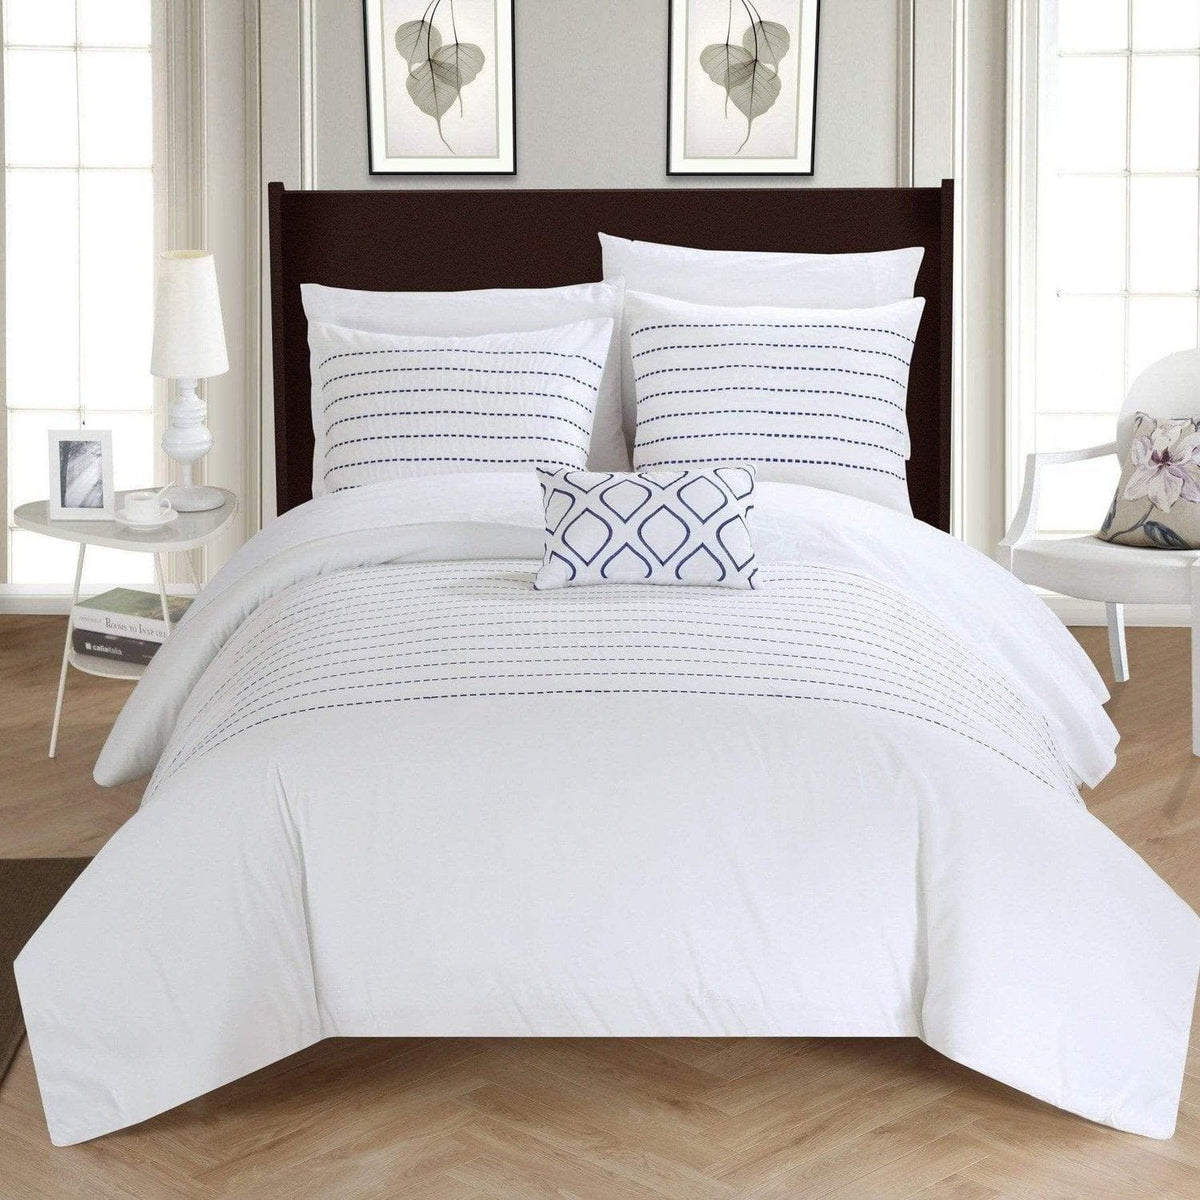 Chic Home Bea 8 Piece Embroidered Duvet Cover Set White